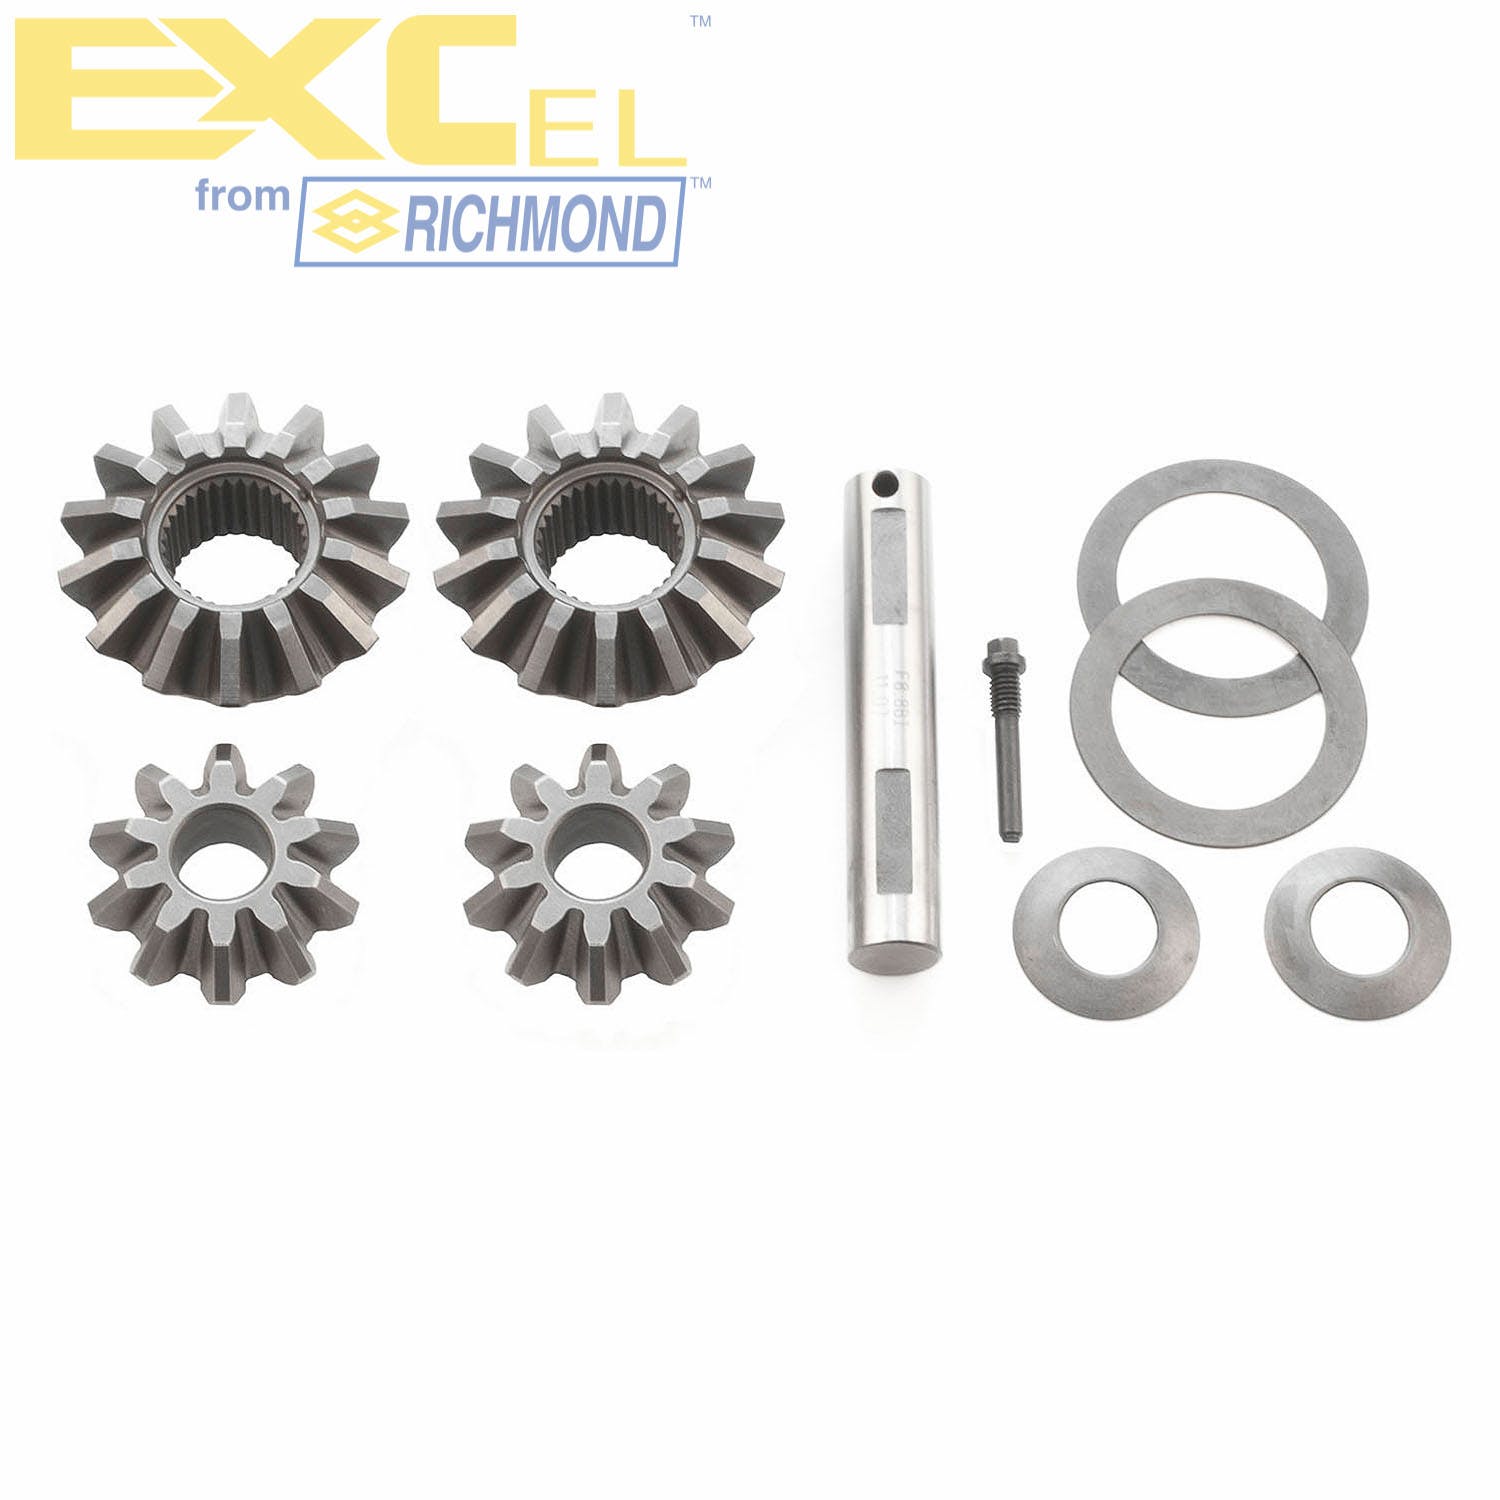 Excel XL-4014 Differential Carrier Gear Kit